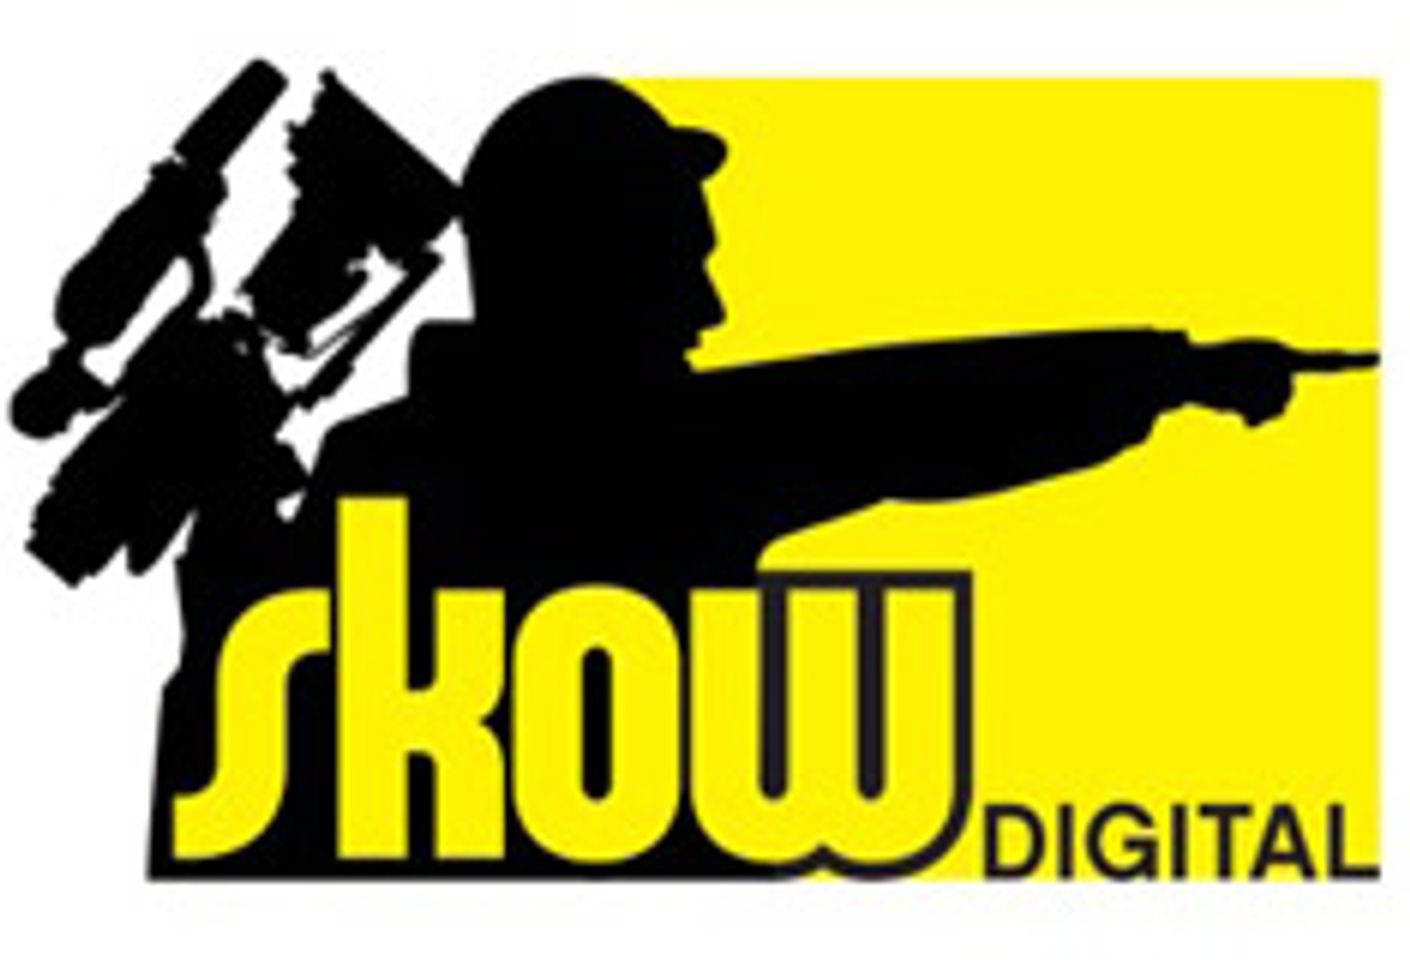 Skow Digital Crowned Best New Production Company at AVN Awards